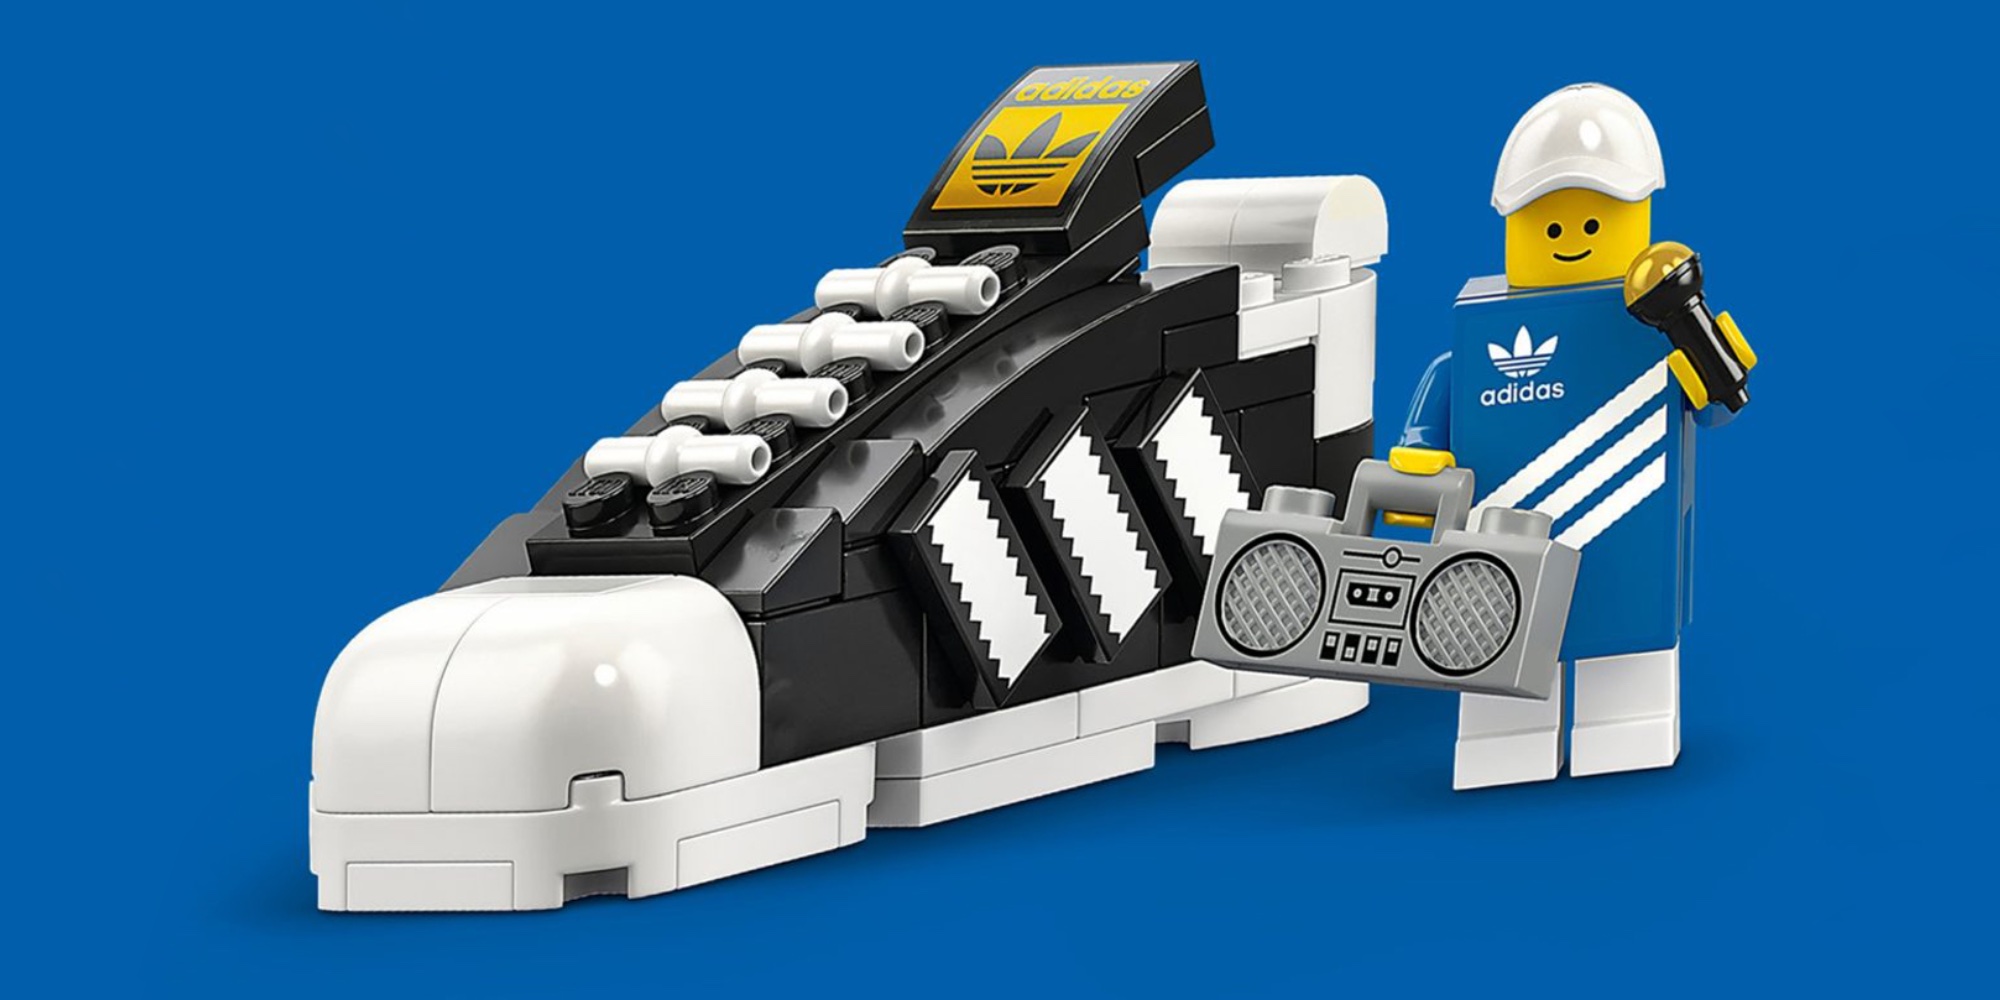 January foul Seedling LEGO mini adidas Superstar launch as latest gift with purchase - 9to5Toys